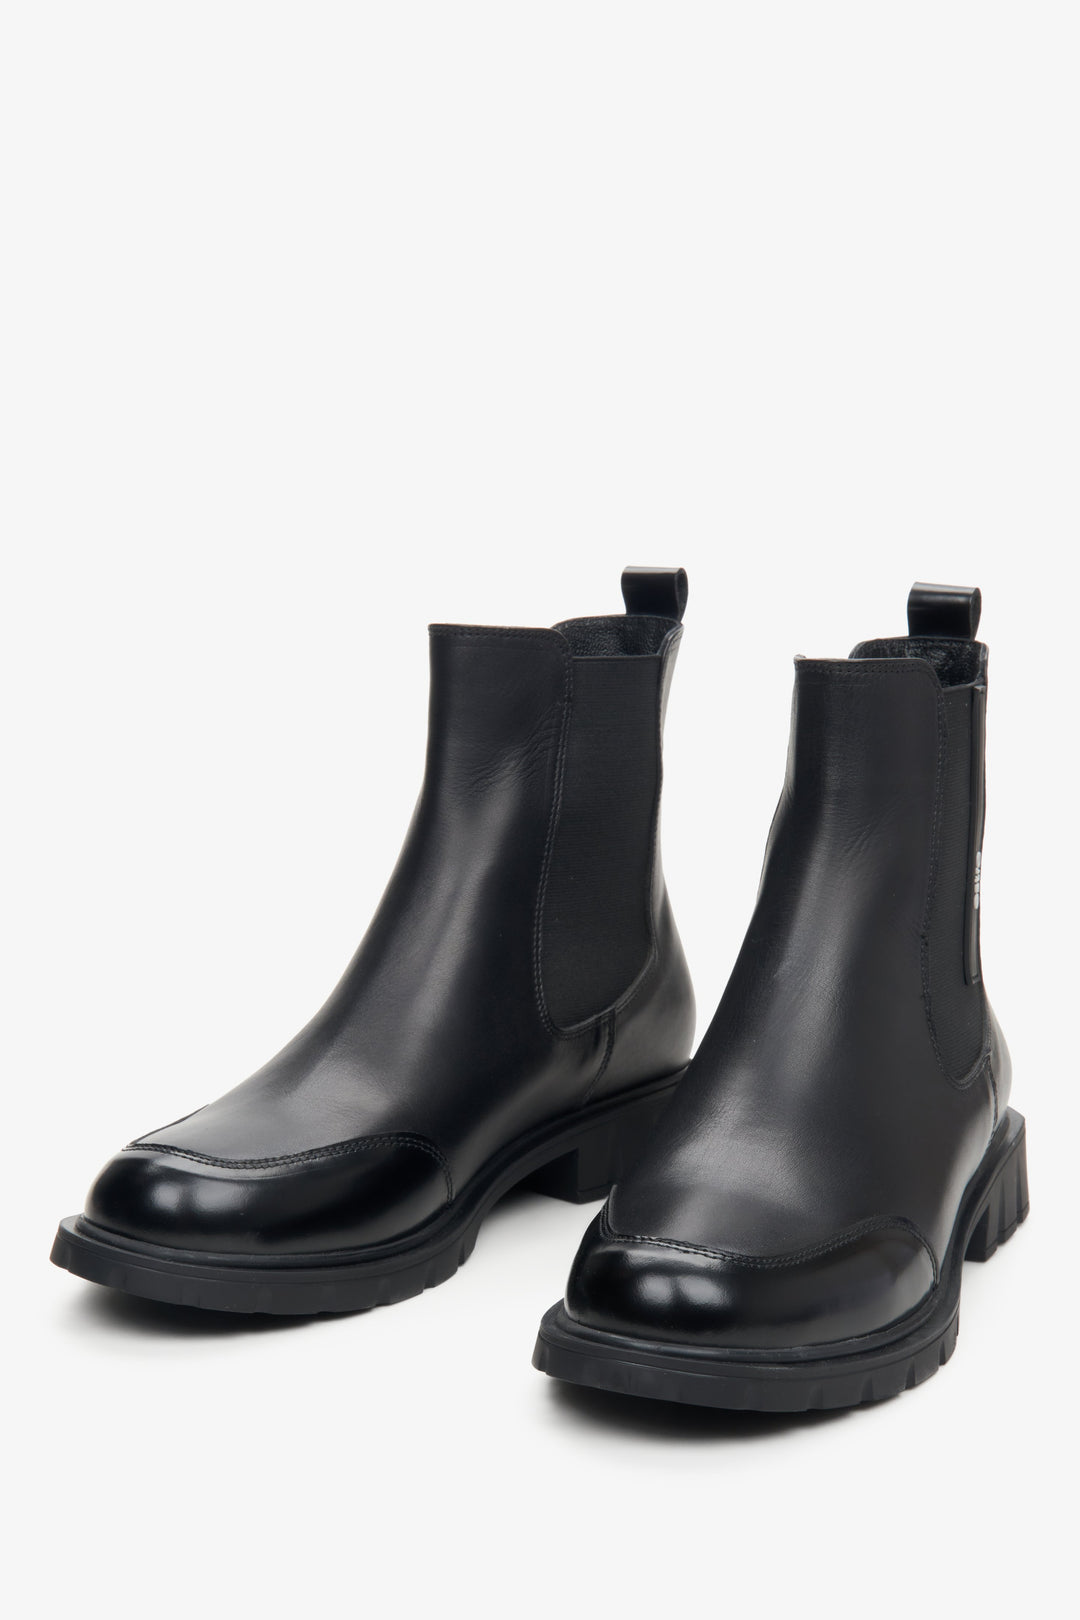 Women's black leather Estro  Chelsea boots - close-up on the toe.